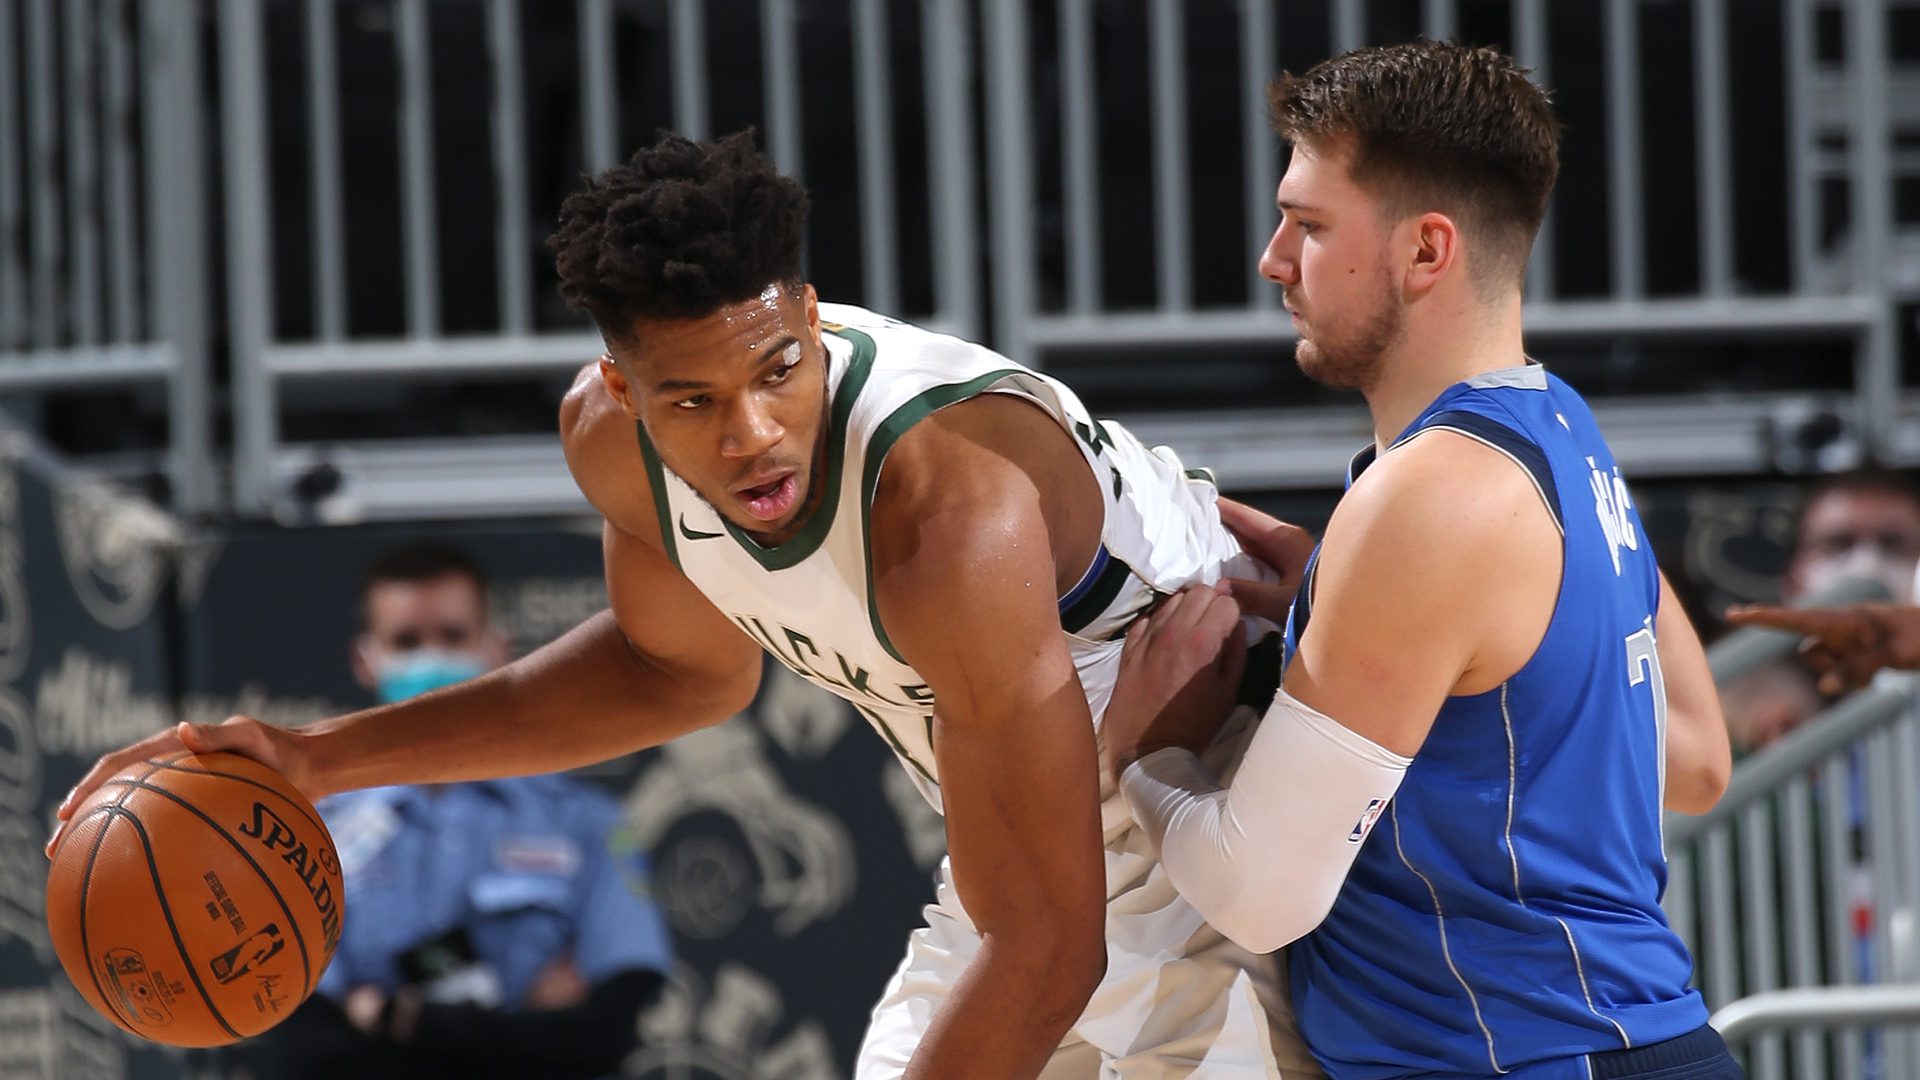 Luka Doncic and Giannis Antetokounmpo are the favorites to win NBA MVP